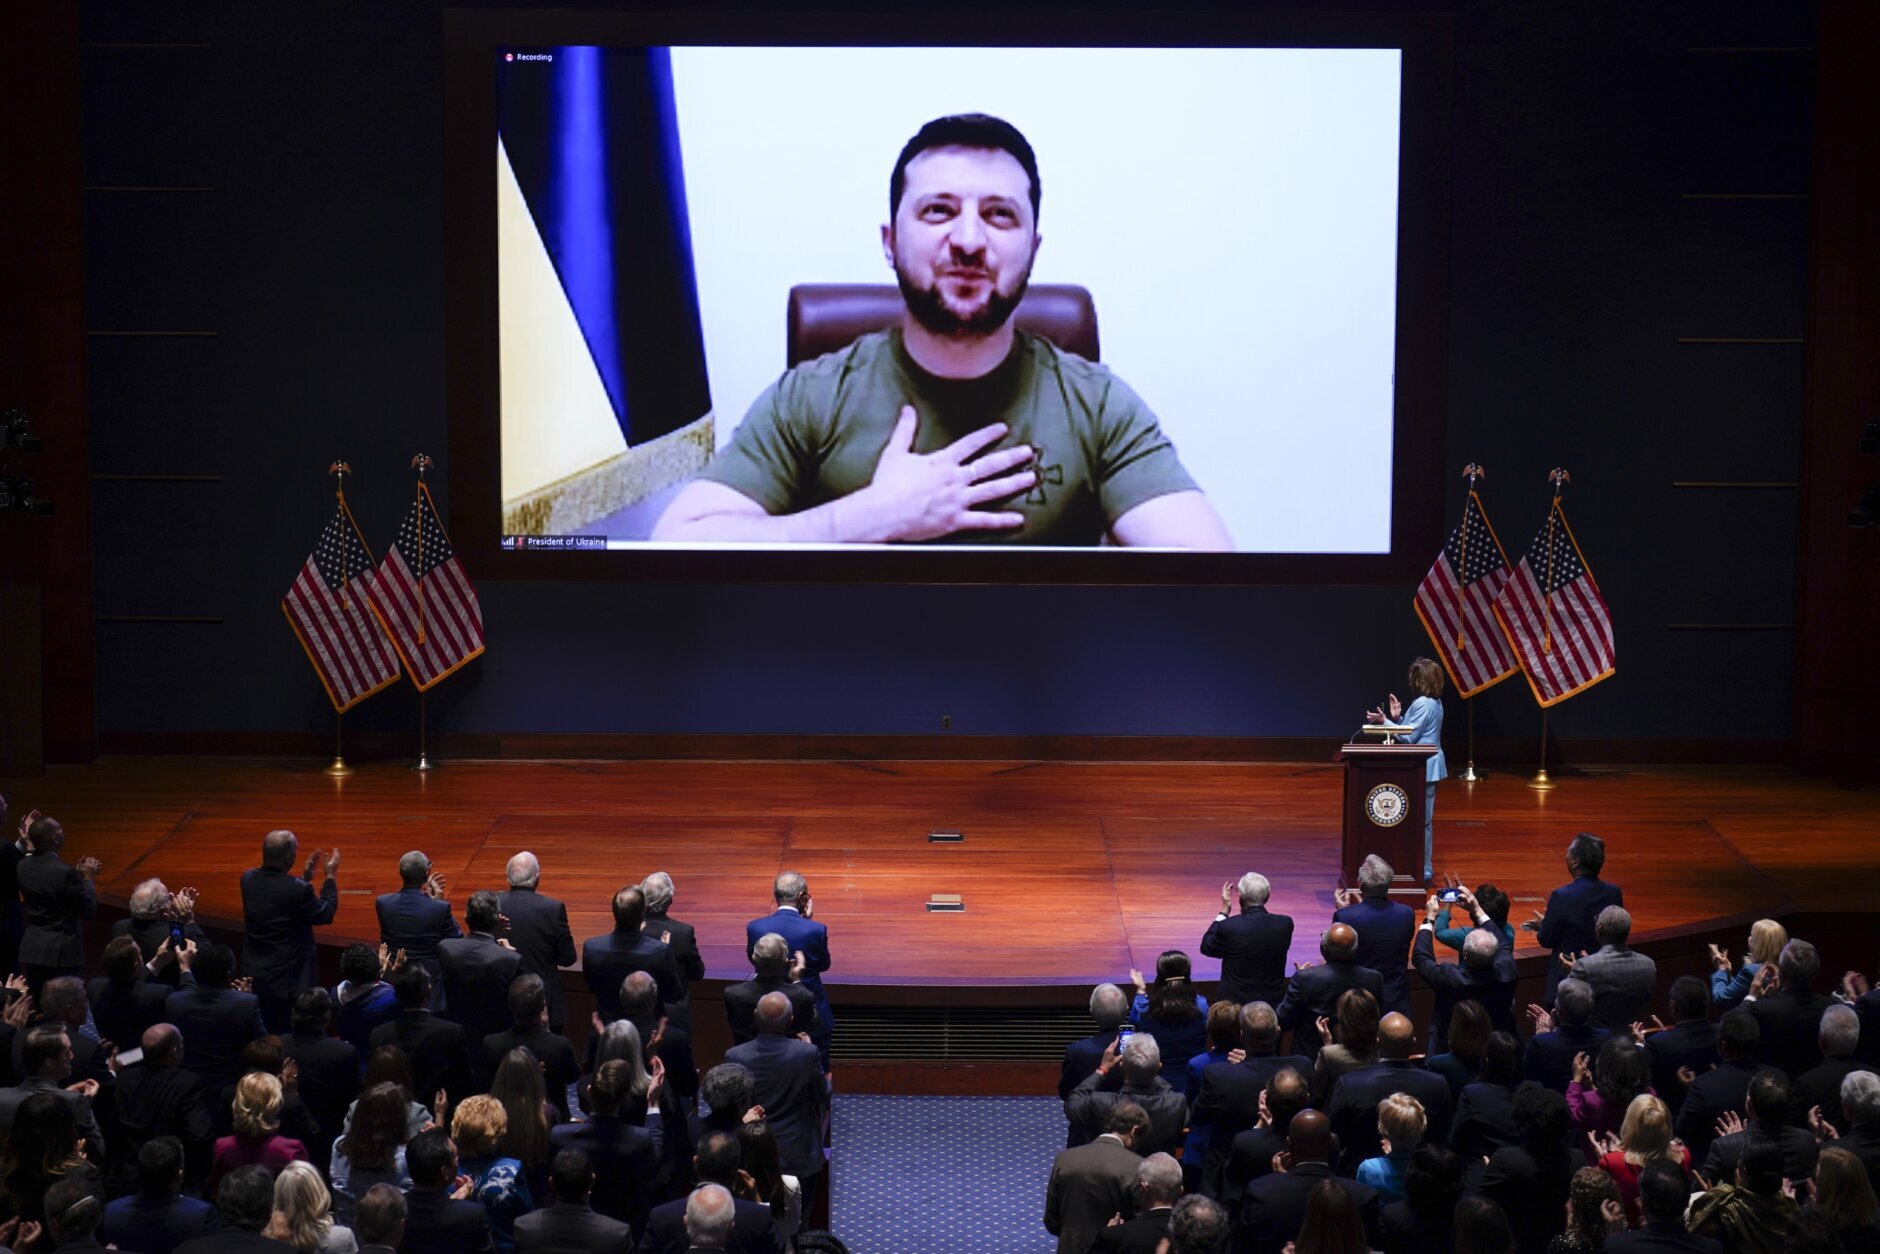 <p>Speaker of the House Nancy Pelosi, D-Calif., introduces Ukrainian President Volodymyr Zelenskyy to speak to the U.S. Congress by video at the Capitol in Washington, Wednesday, March 16, 2022.</p>
